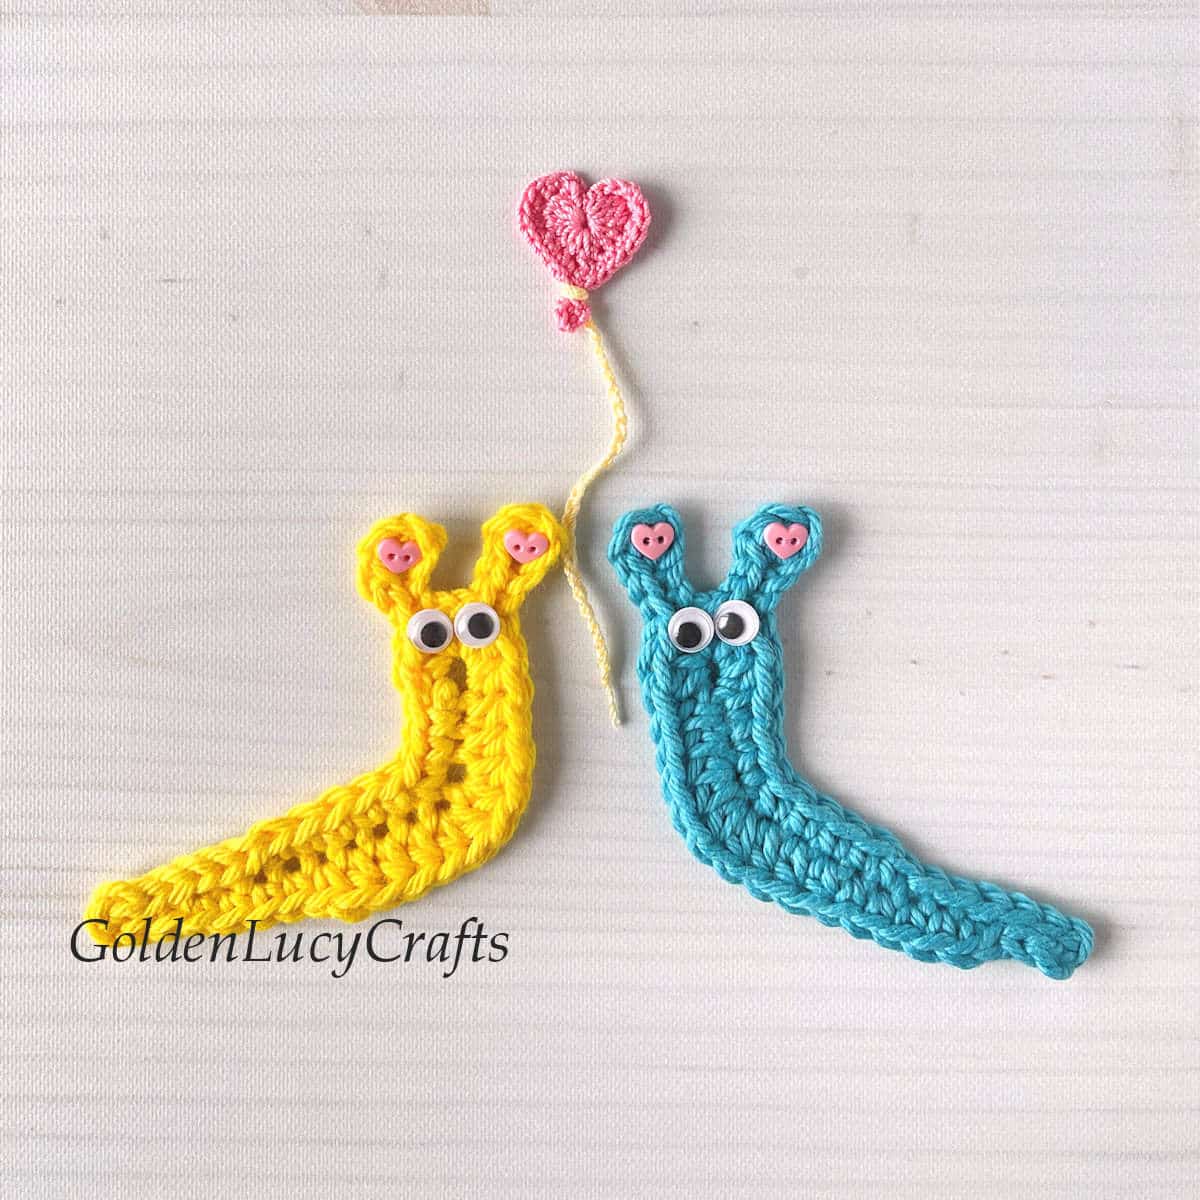 Two crocheted slugs and a heart balloon above them.